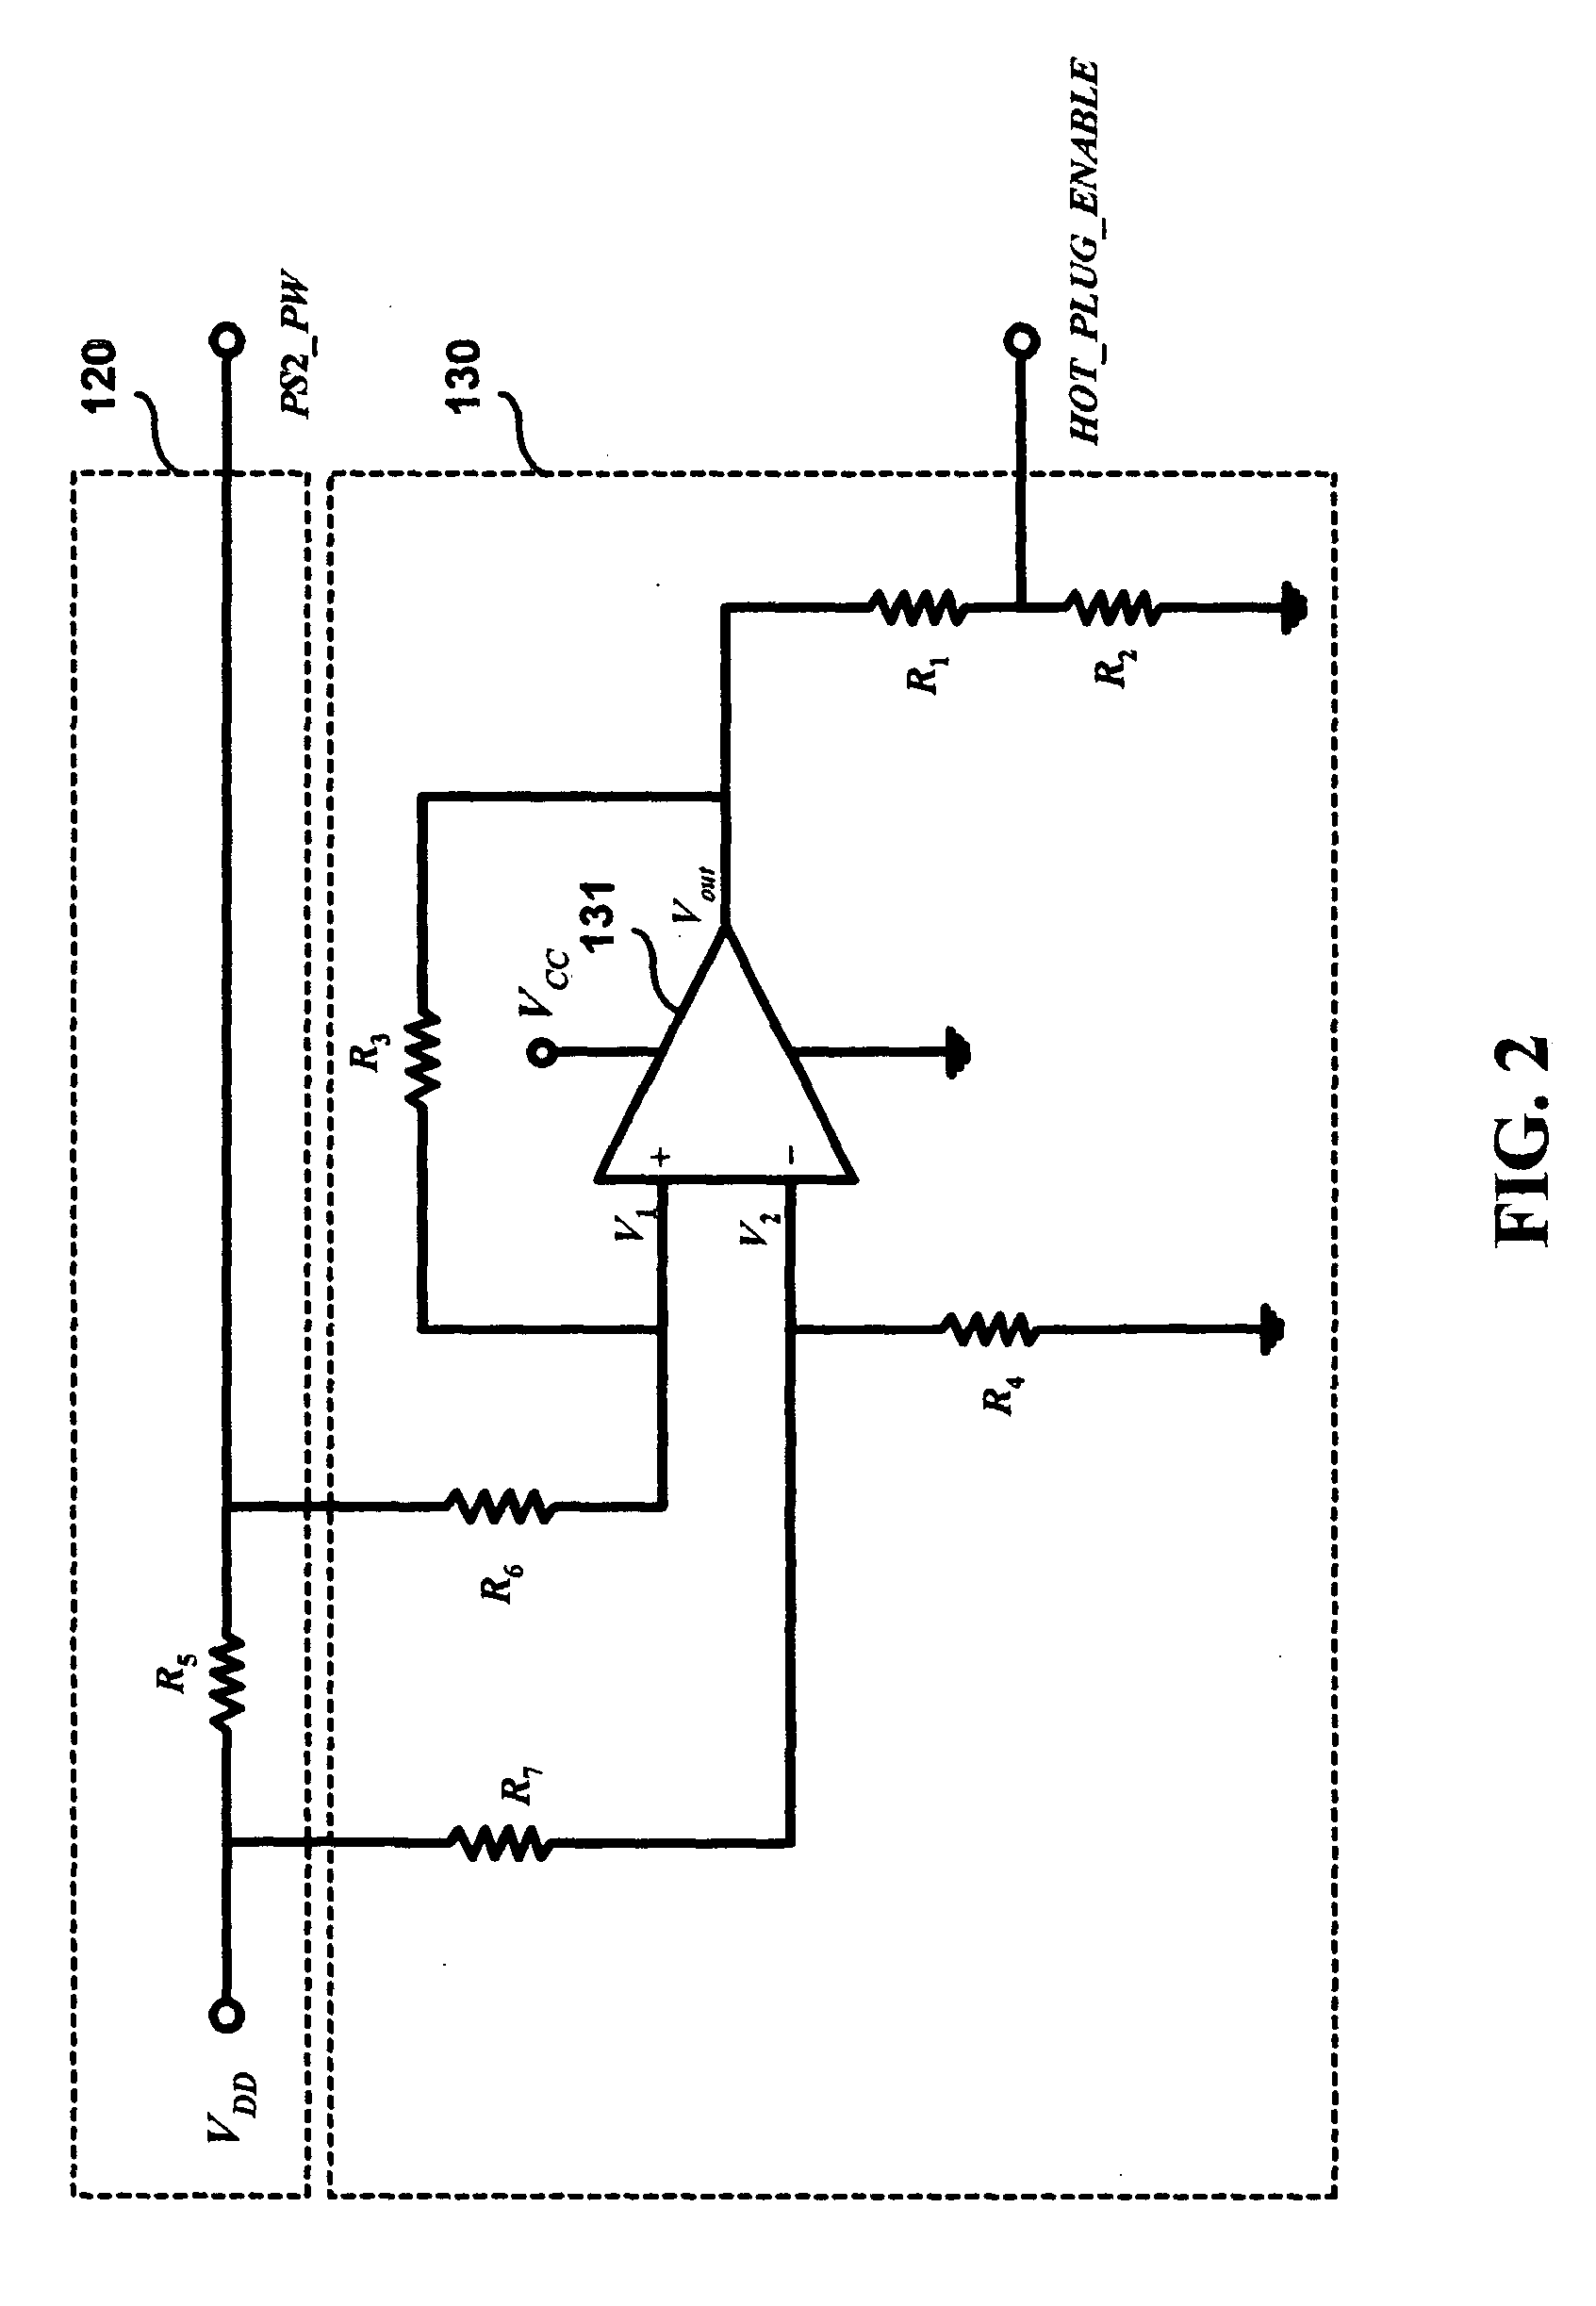 Hot-pluggable peripheral input device coupling system